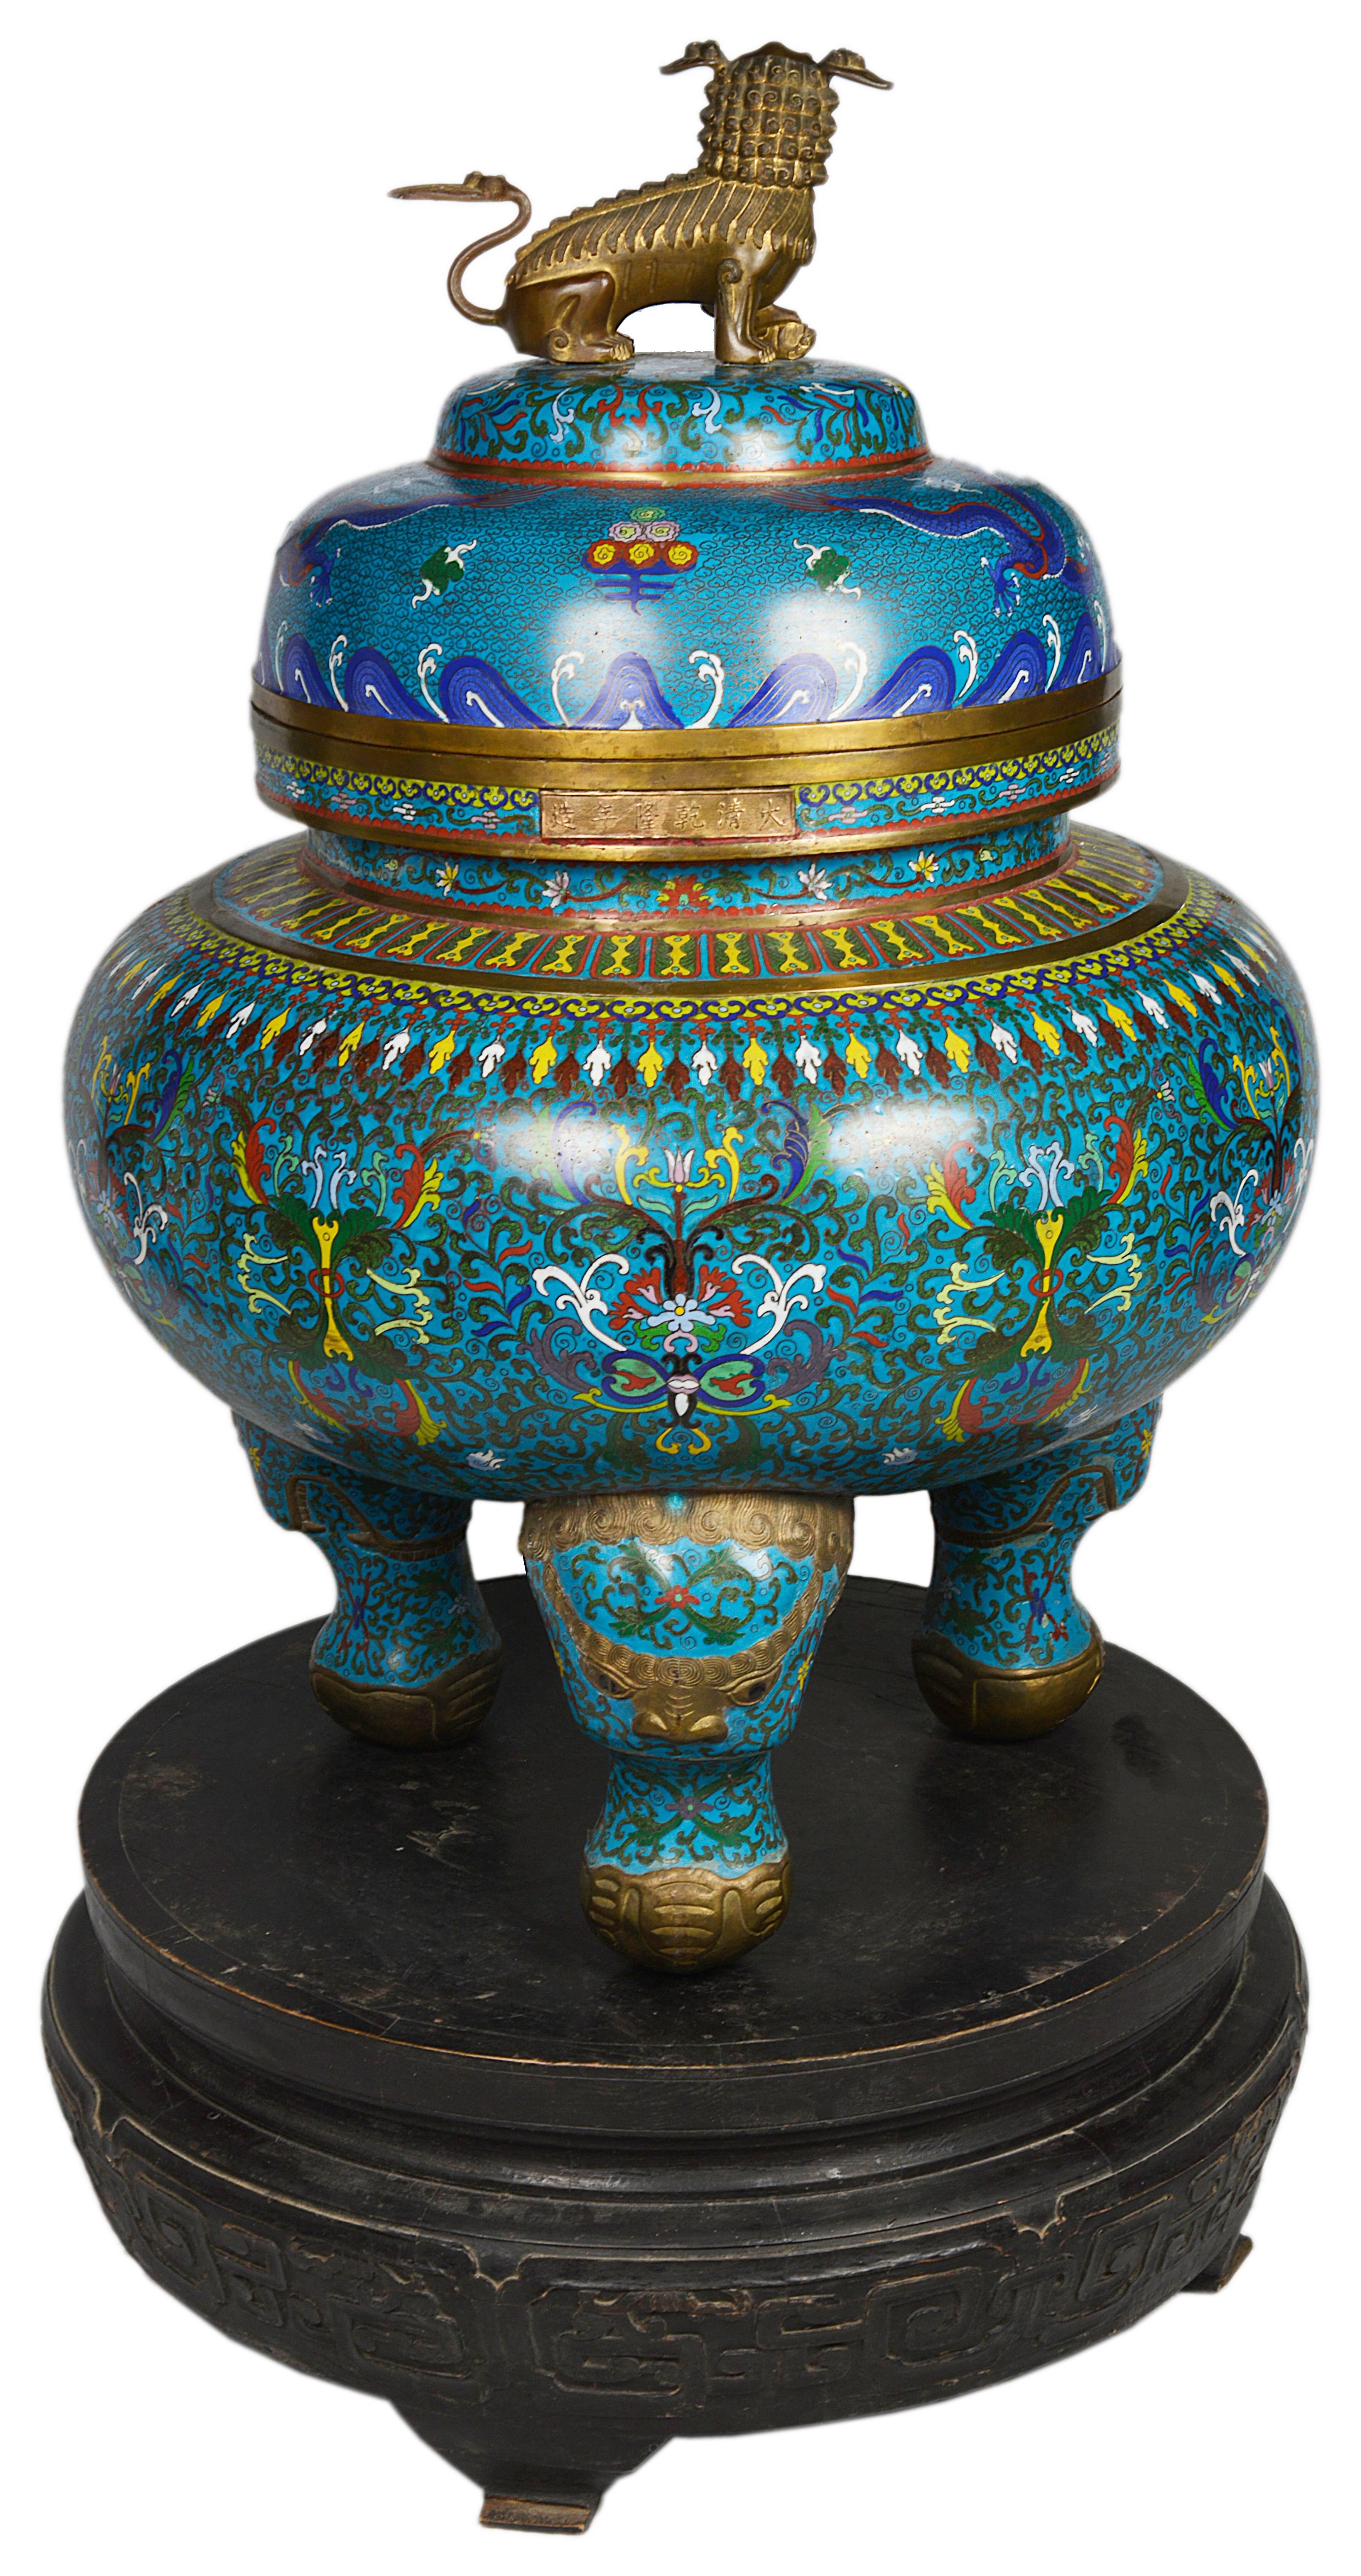 A very impressive Chinese late 19th century cloisonné lidded Koro. Having a mythical dog of faux as a finial. The cloisonné enamel depicting dragons and classical symbols, set up on a carved ebonized stand.